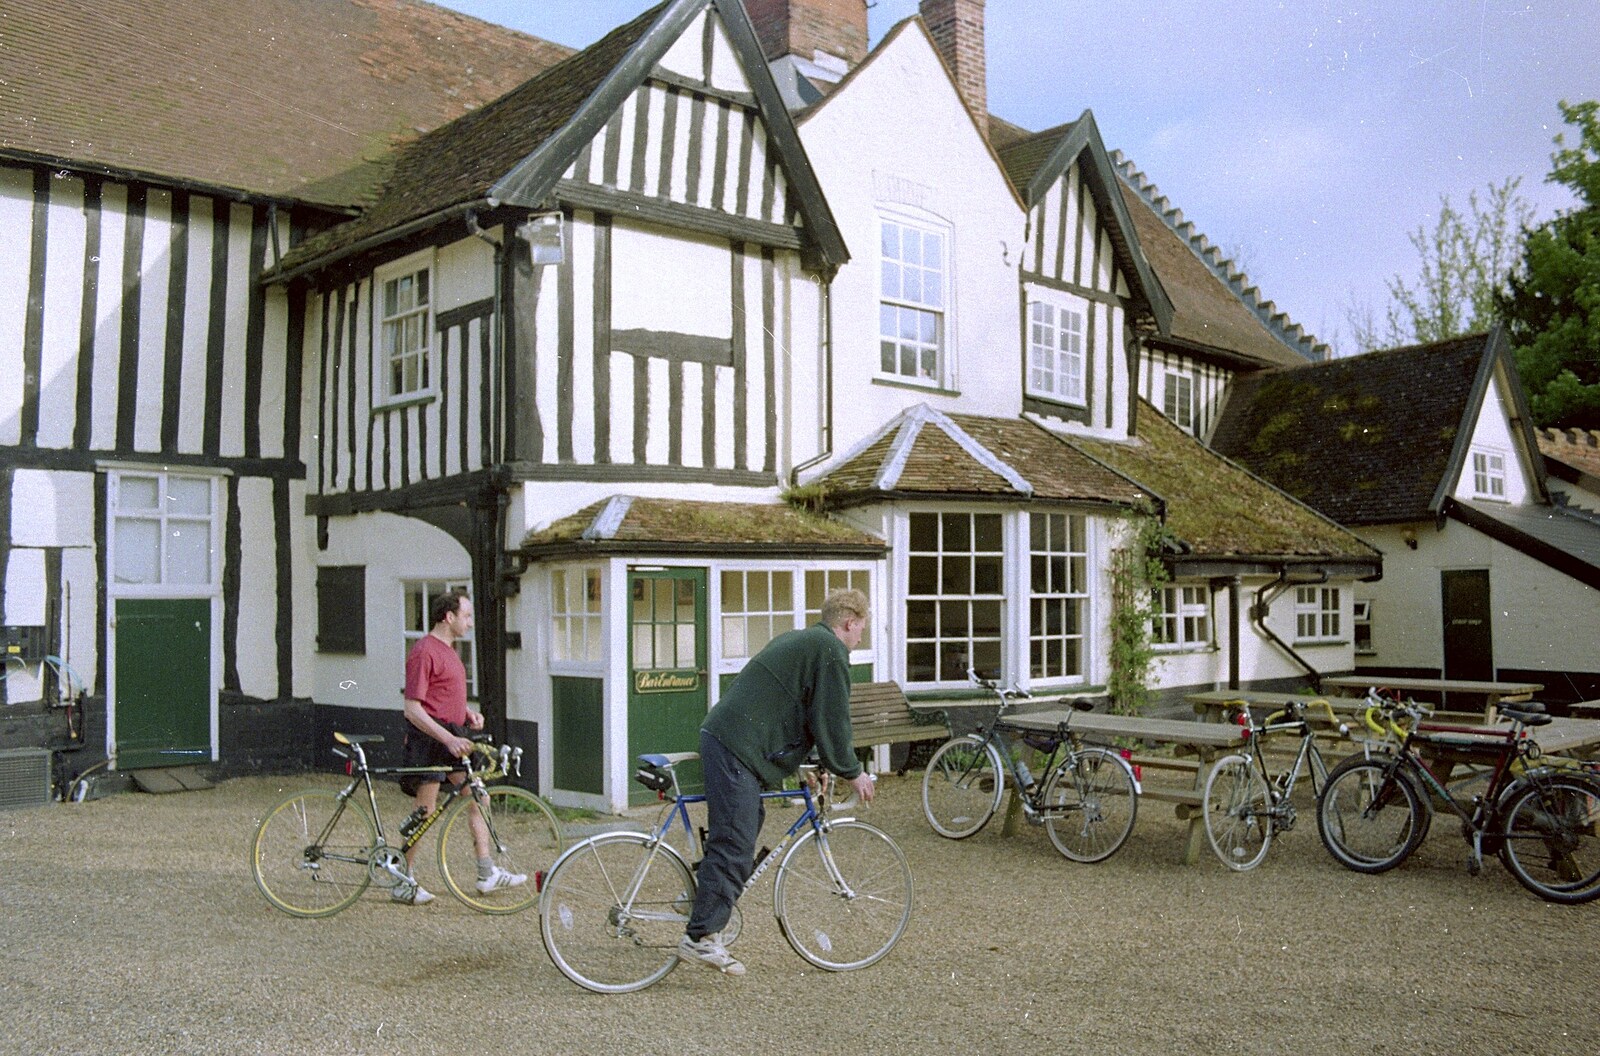 Bikes outside the Hoxne Swan from A BSCC Bike Ride, Brockdish Greyhound and Hoxne Swan, Suffolk - 4th May 2000